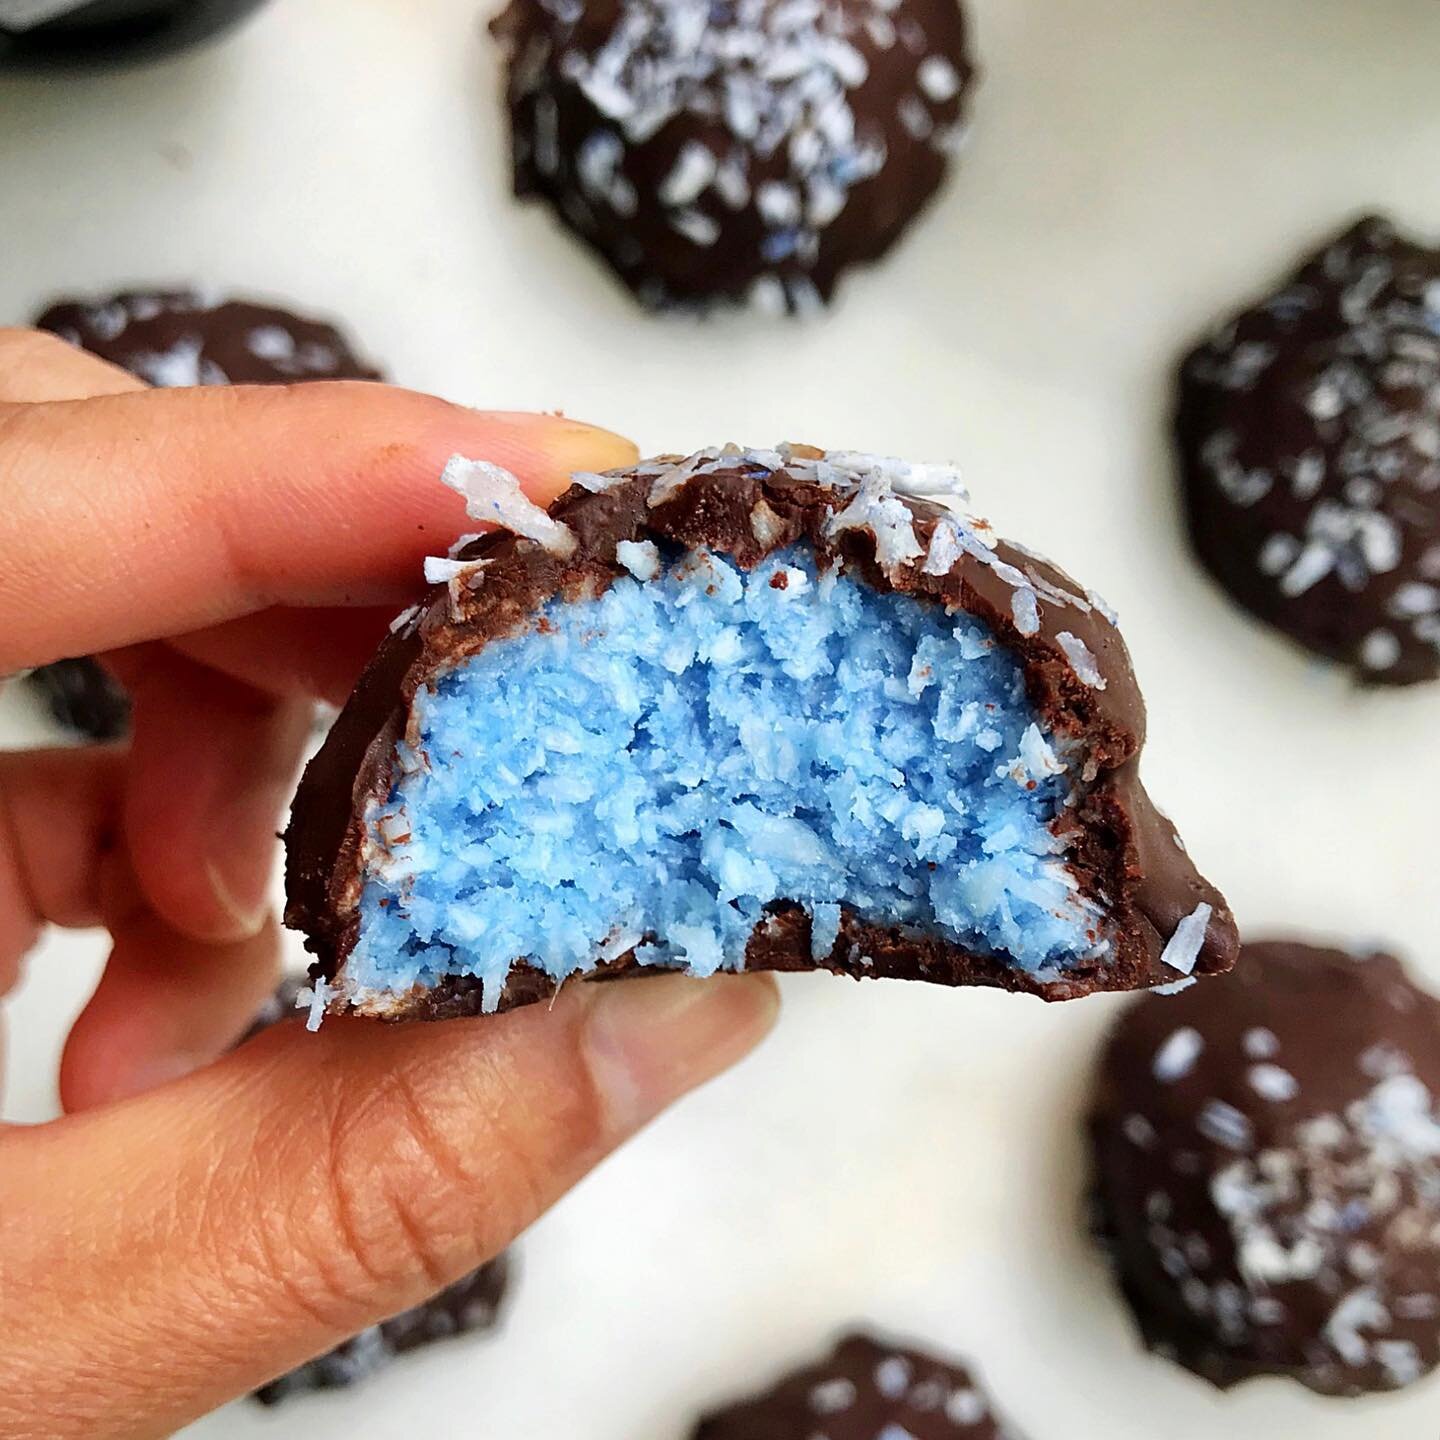 Paleo almond joy truffles to boost your mood + sweeten up this Friday! 💙✨ These babies have a splash of blue spirulina for a fun pop of color + added nutrients, and maca powder, an adaptogen that can boost your mood, energy, and libido. 🕺🏻
.
I&rsq